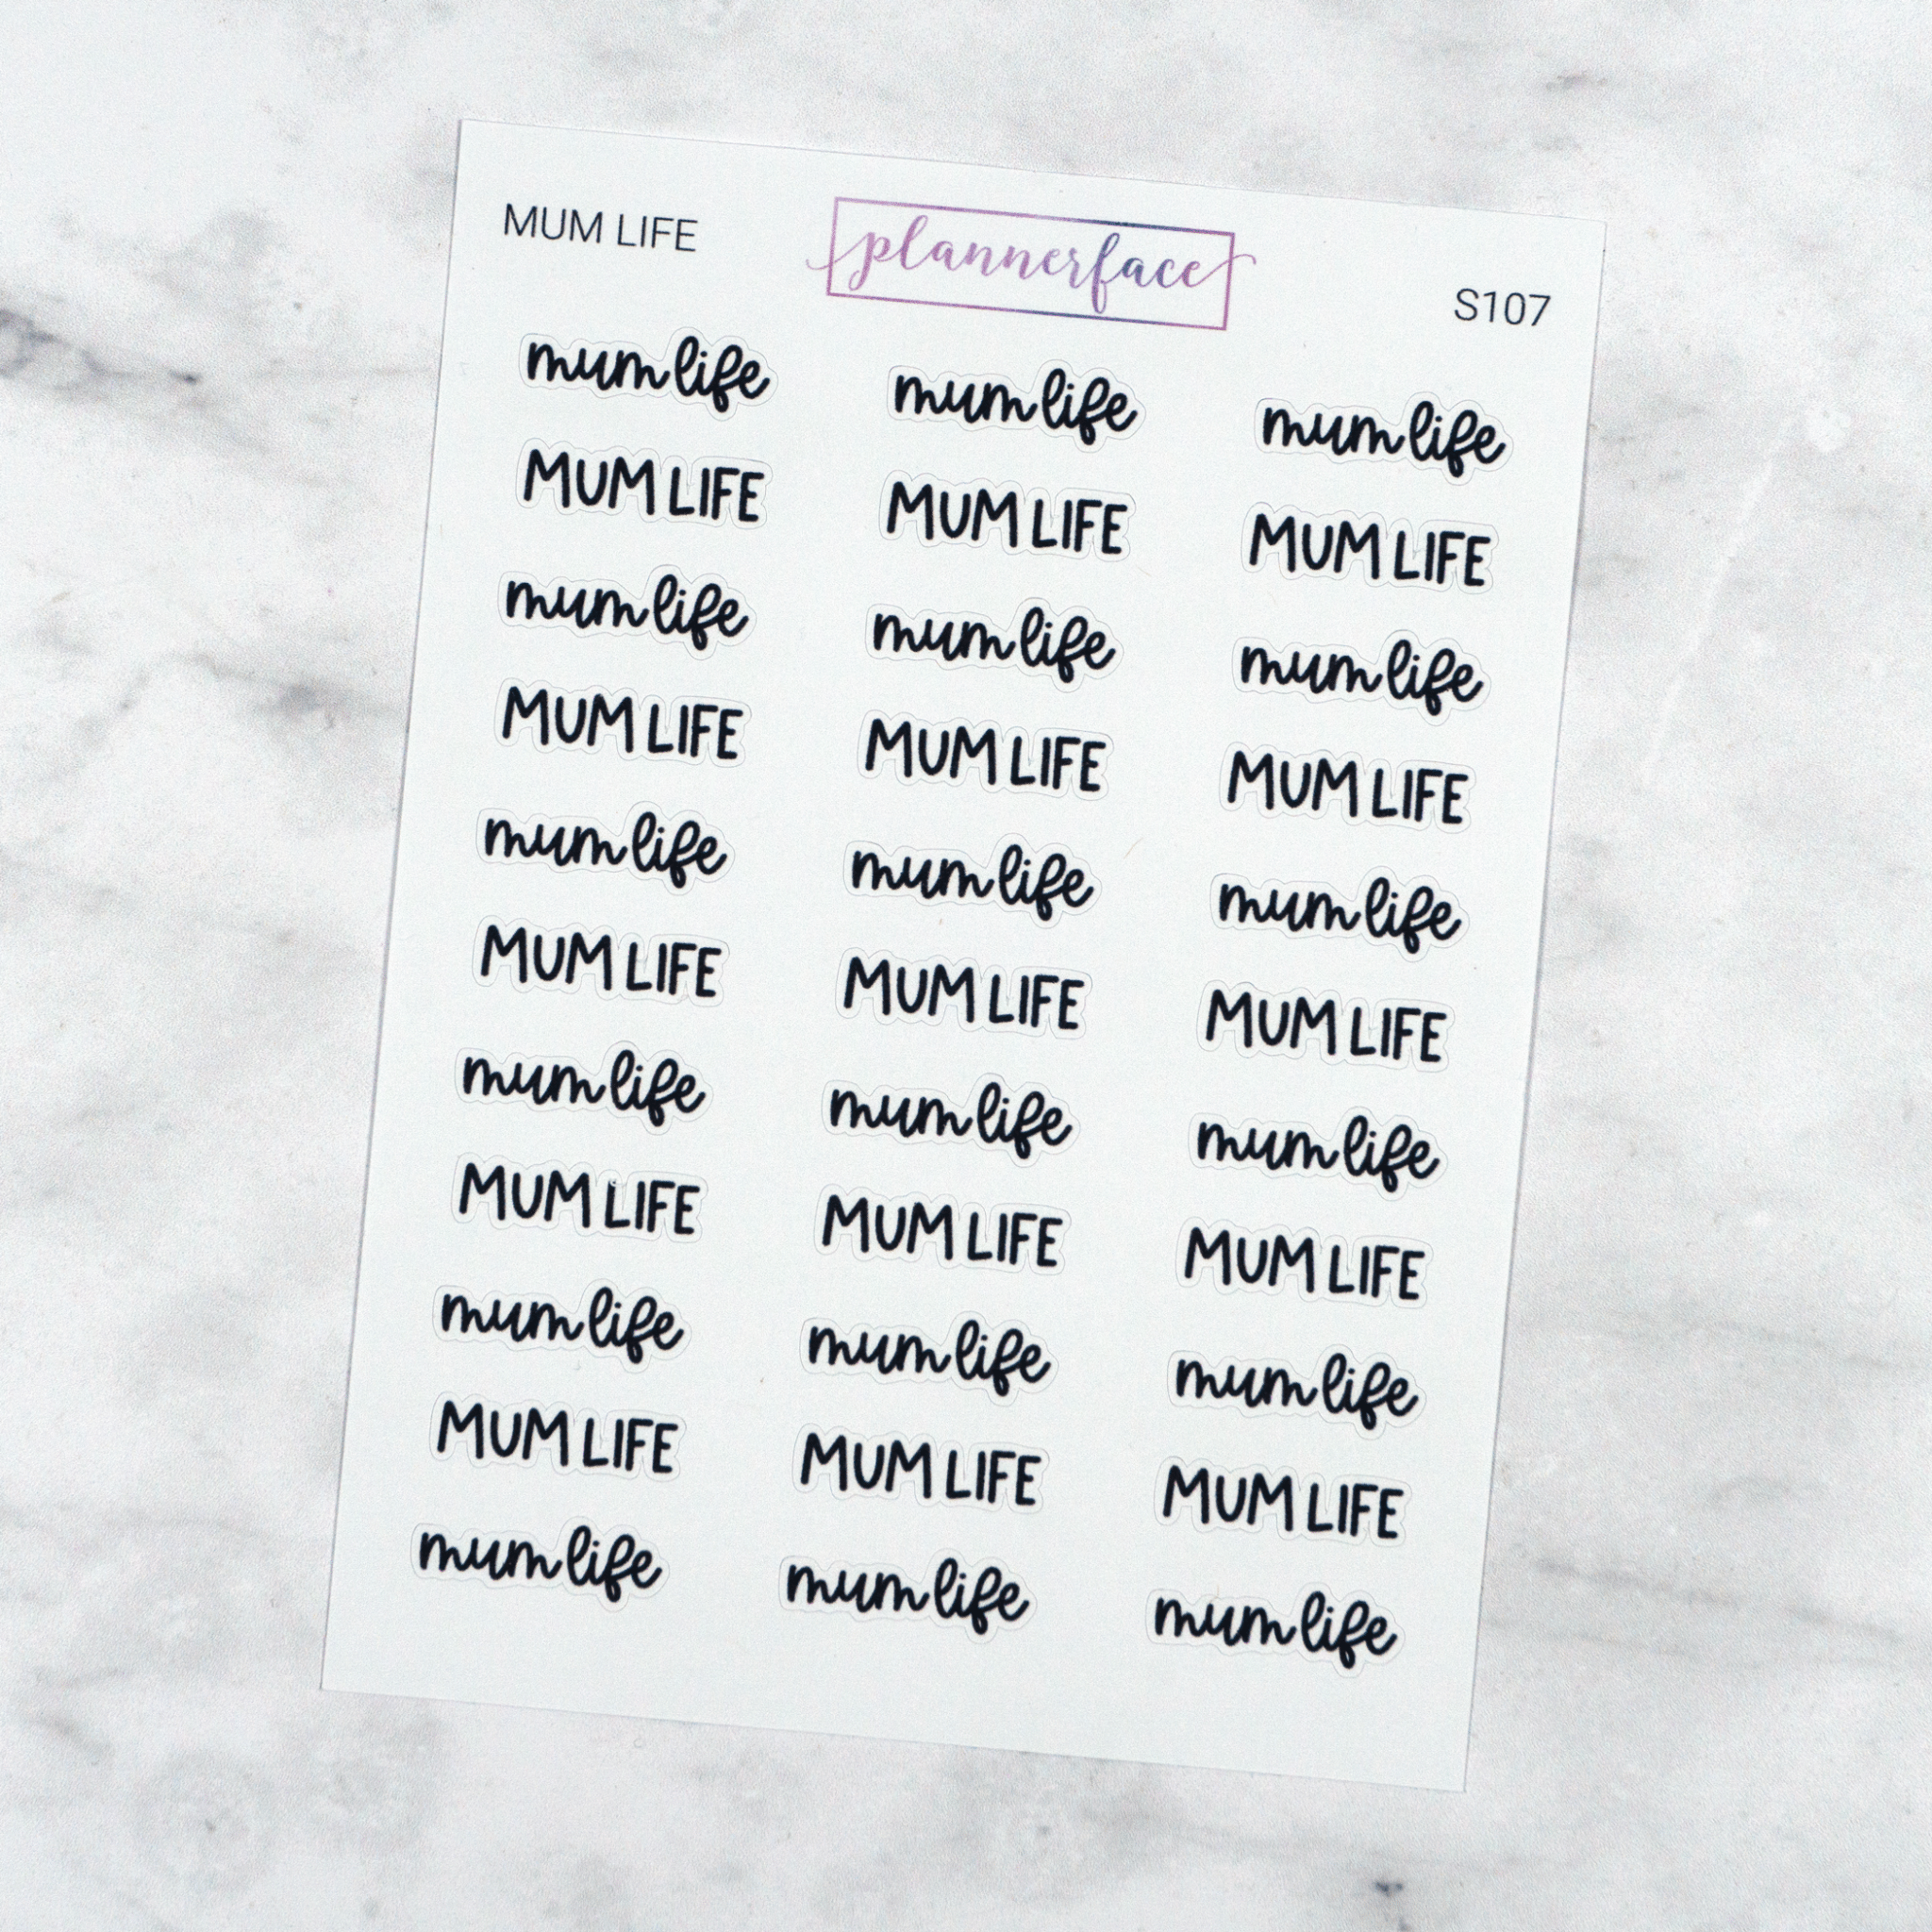 Mum Life | Scripts by Plannerface